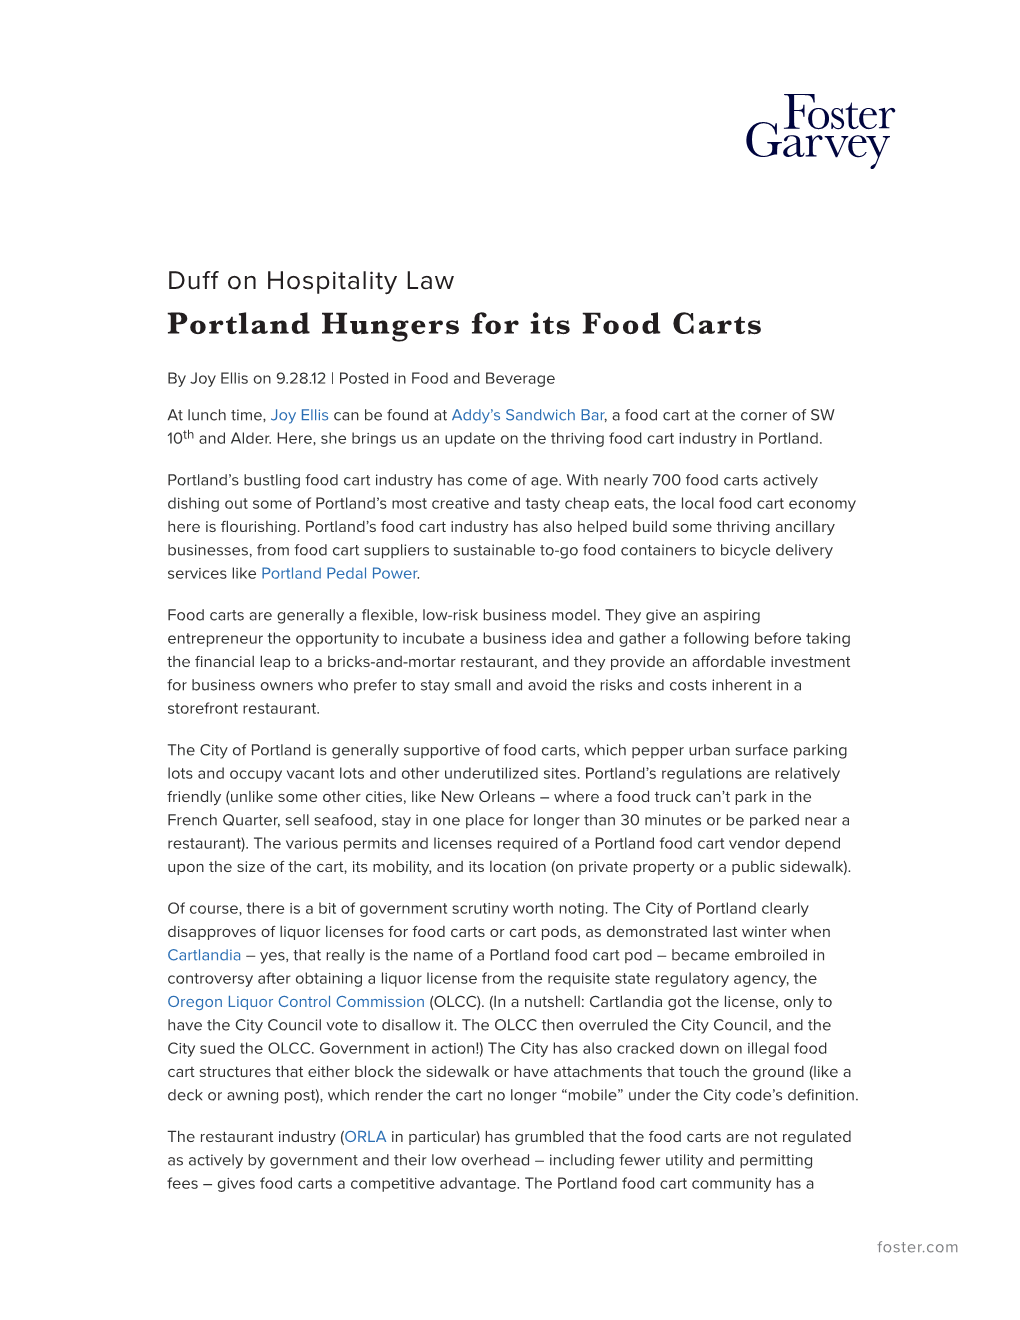 Portland Hungers for Its Food Carts